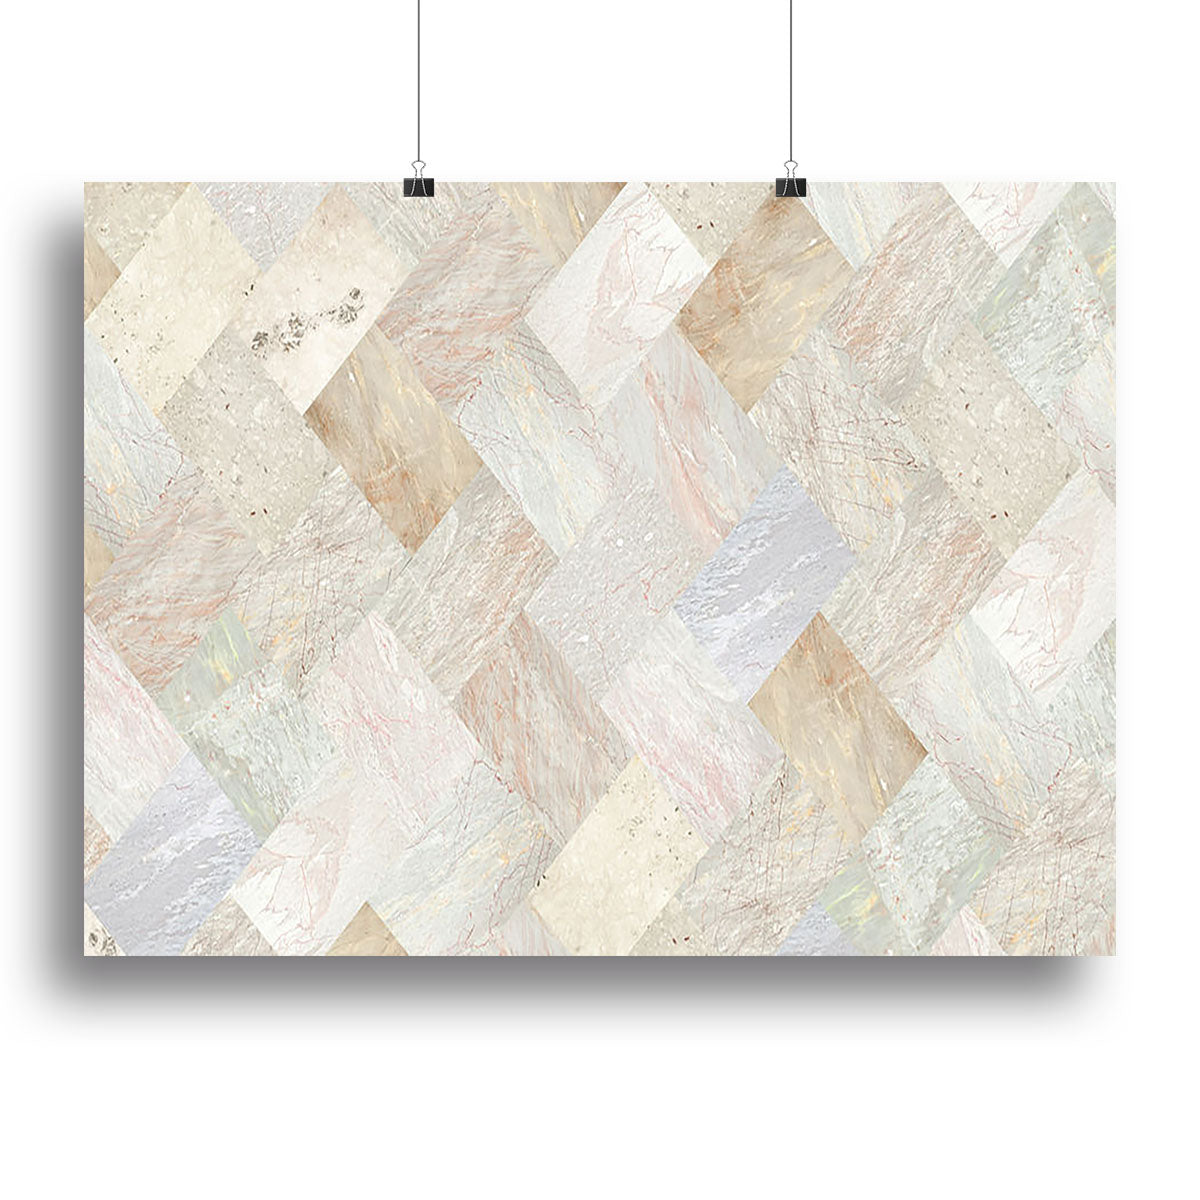 Netural Patterned Marble Canvas Print or Poster - Canvas Art Rocks - 2